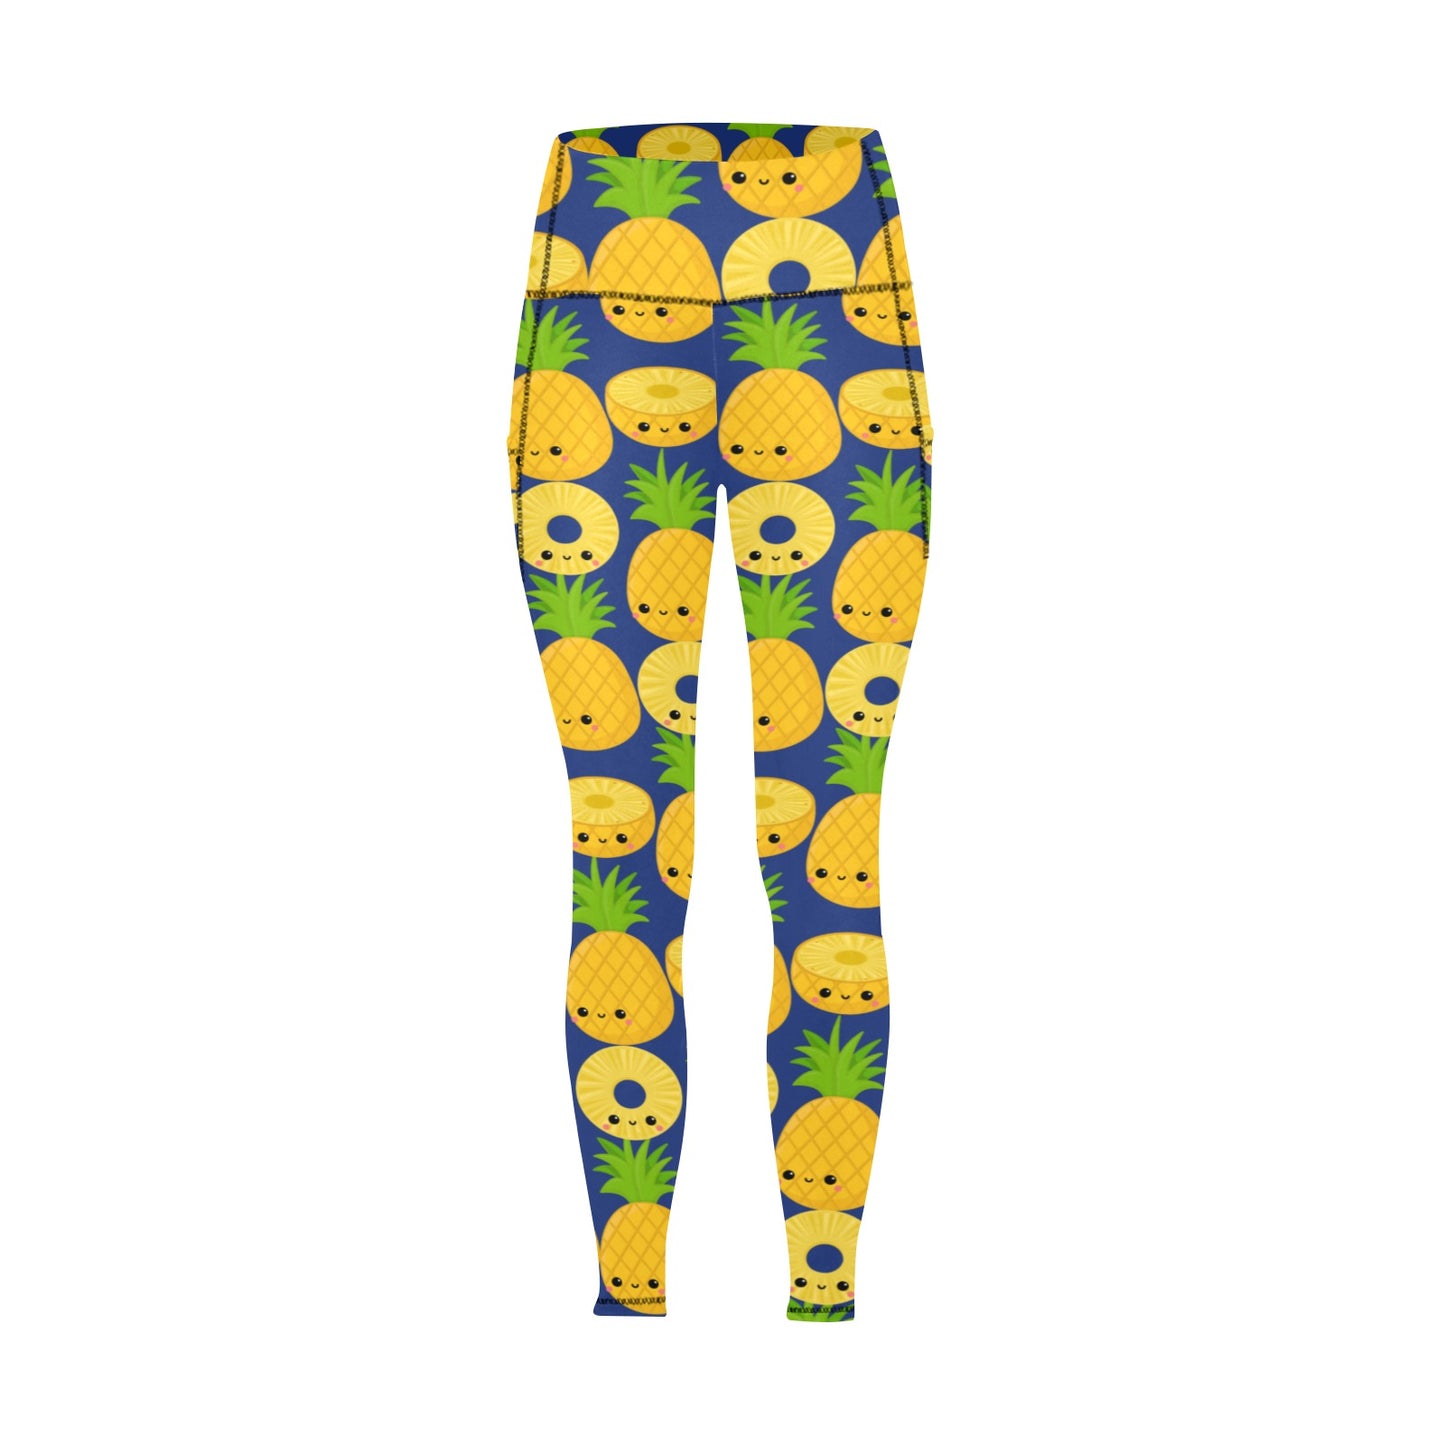 Happy Pineapples - Women's Leggings with Pockets Women's Leggings with Pockets S - 2XL Food